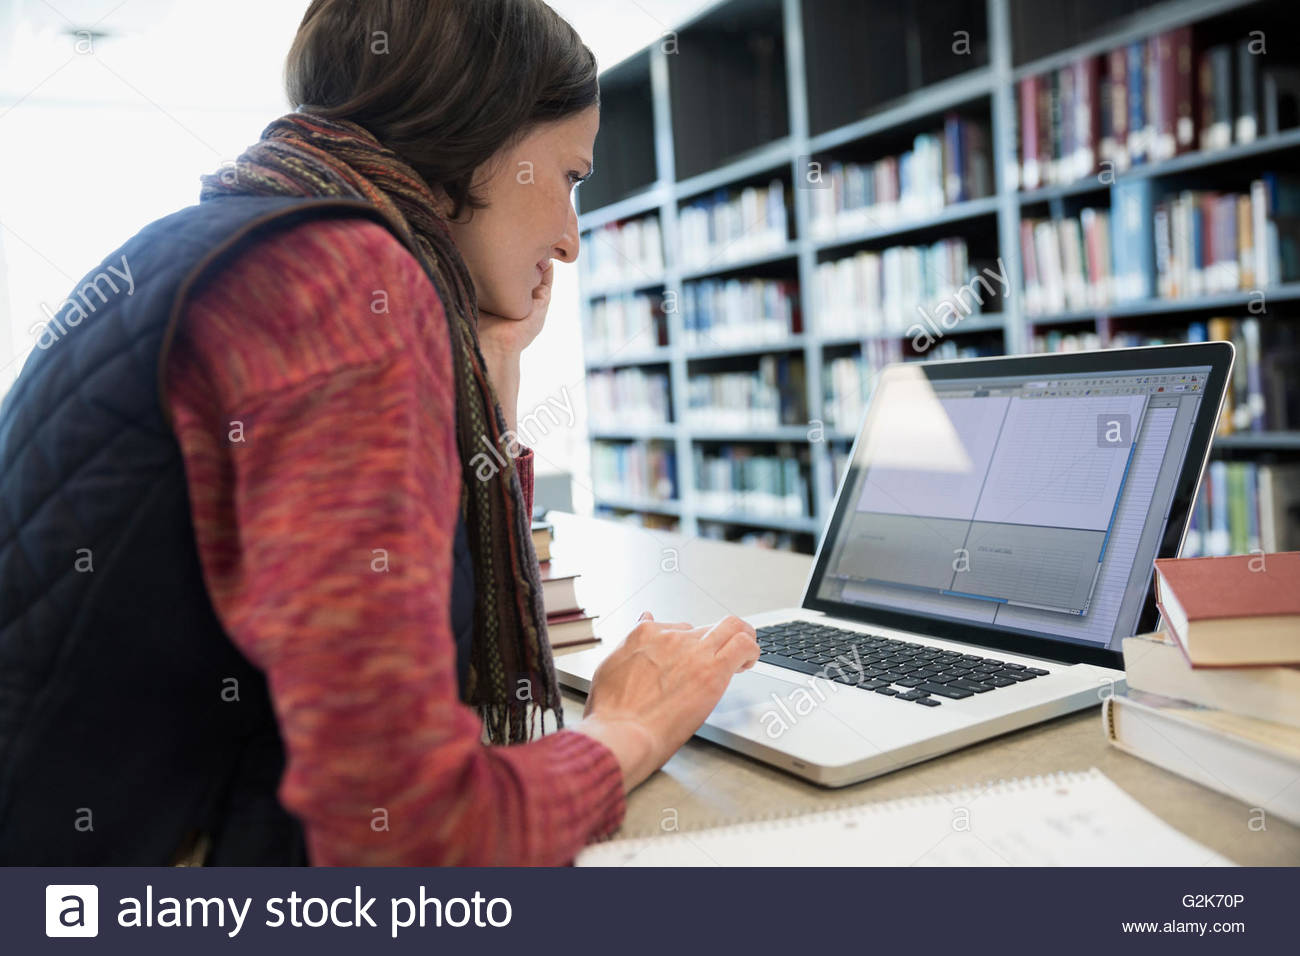 Adult education student researching at laptop in library Stock Photo